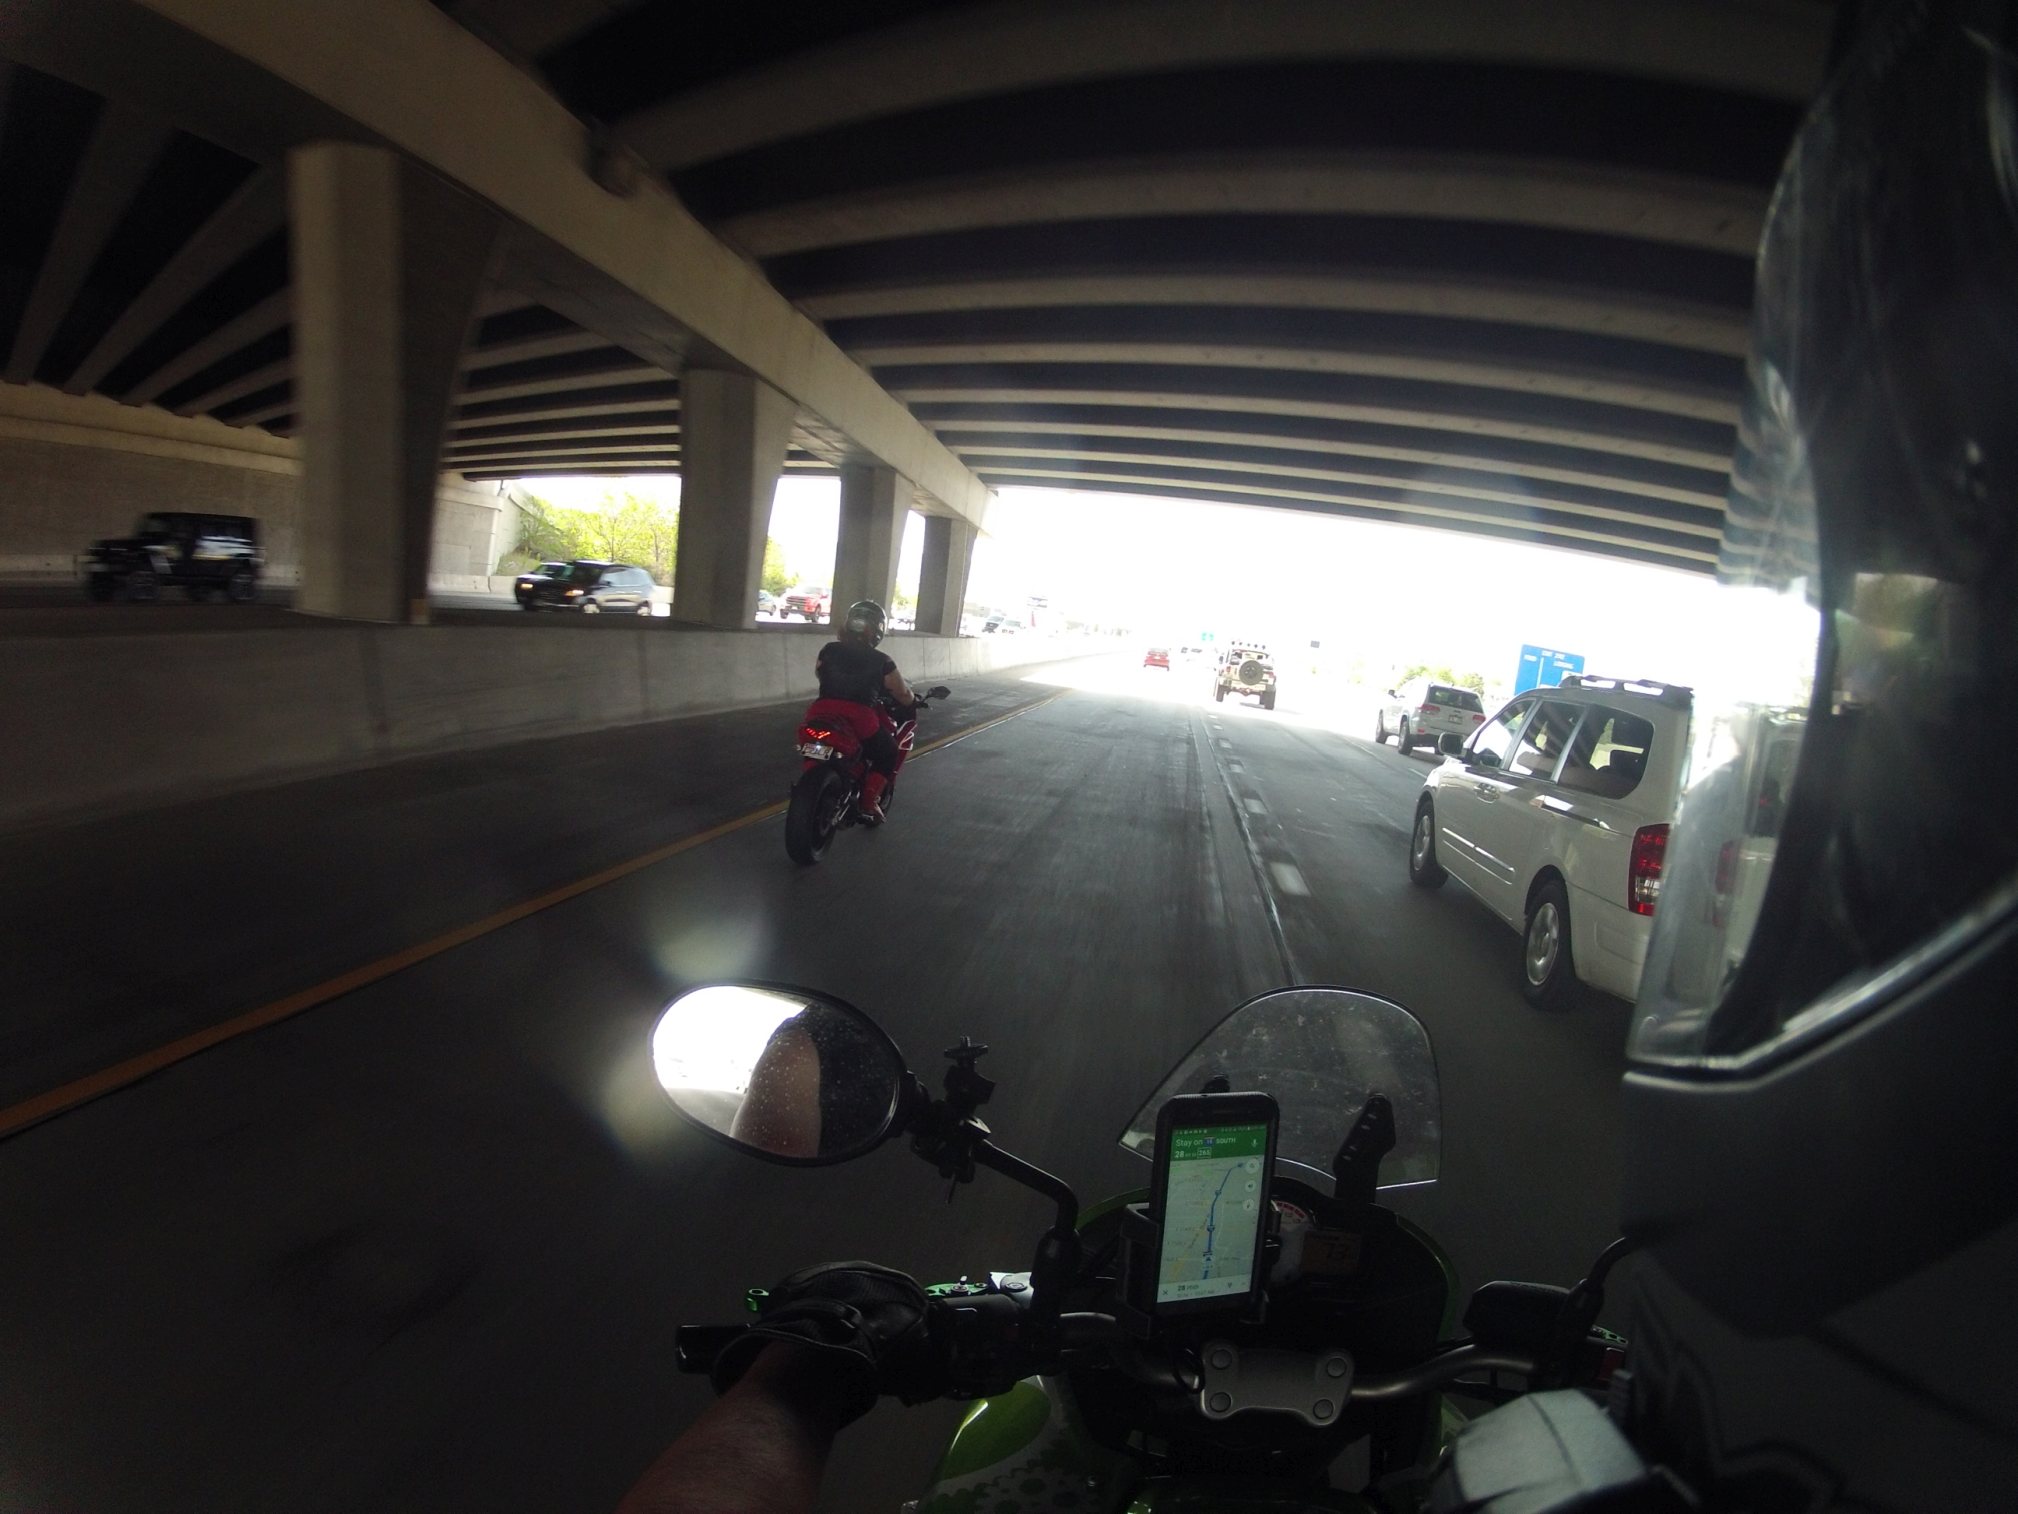 Pictured is a rider astride a motorcycle, helmet visible in the right foreground. Another rider appears two car lengths ahead on the left. They are under a shaded freeway overpass. In the cockpit of the bike a cell phone is visible, displaying GPS navigation with a blue highlighted route.